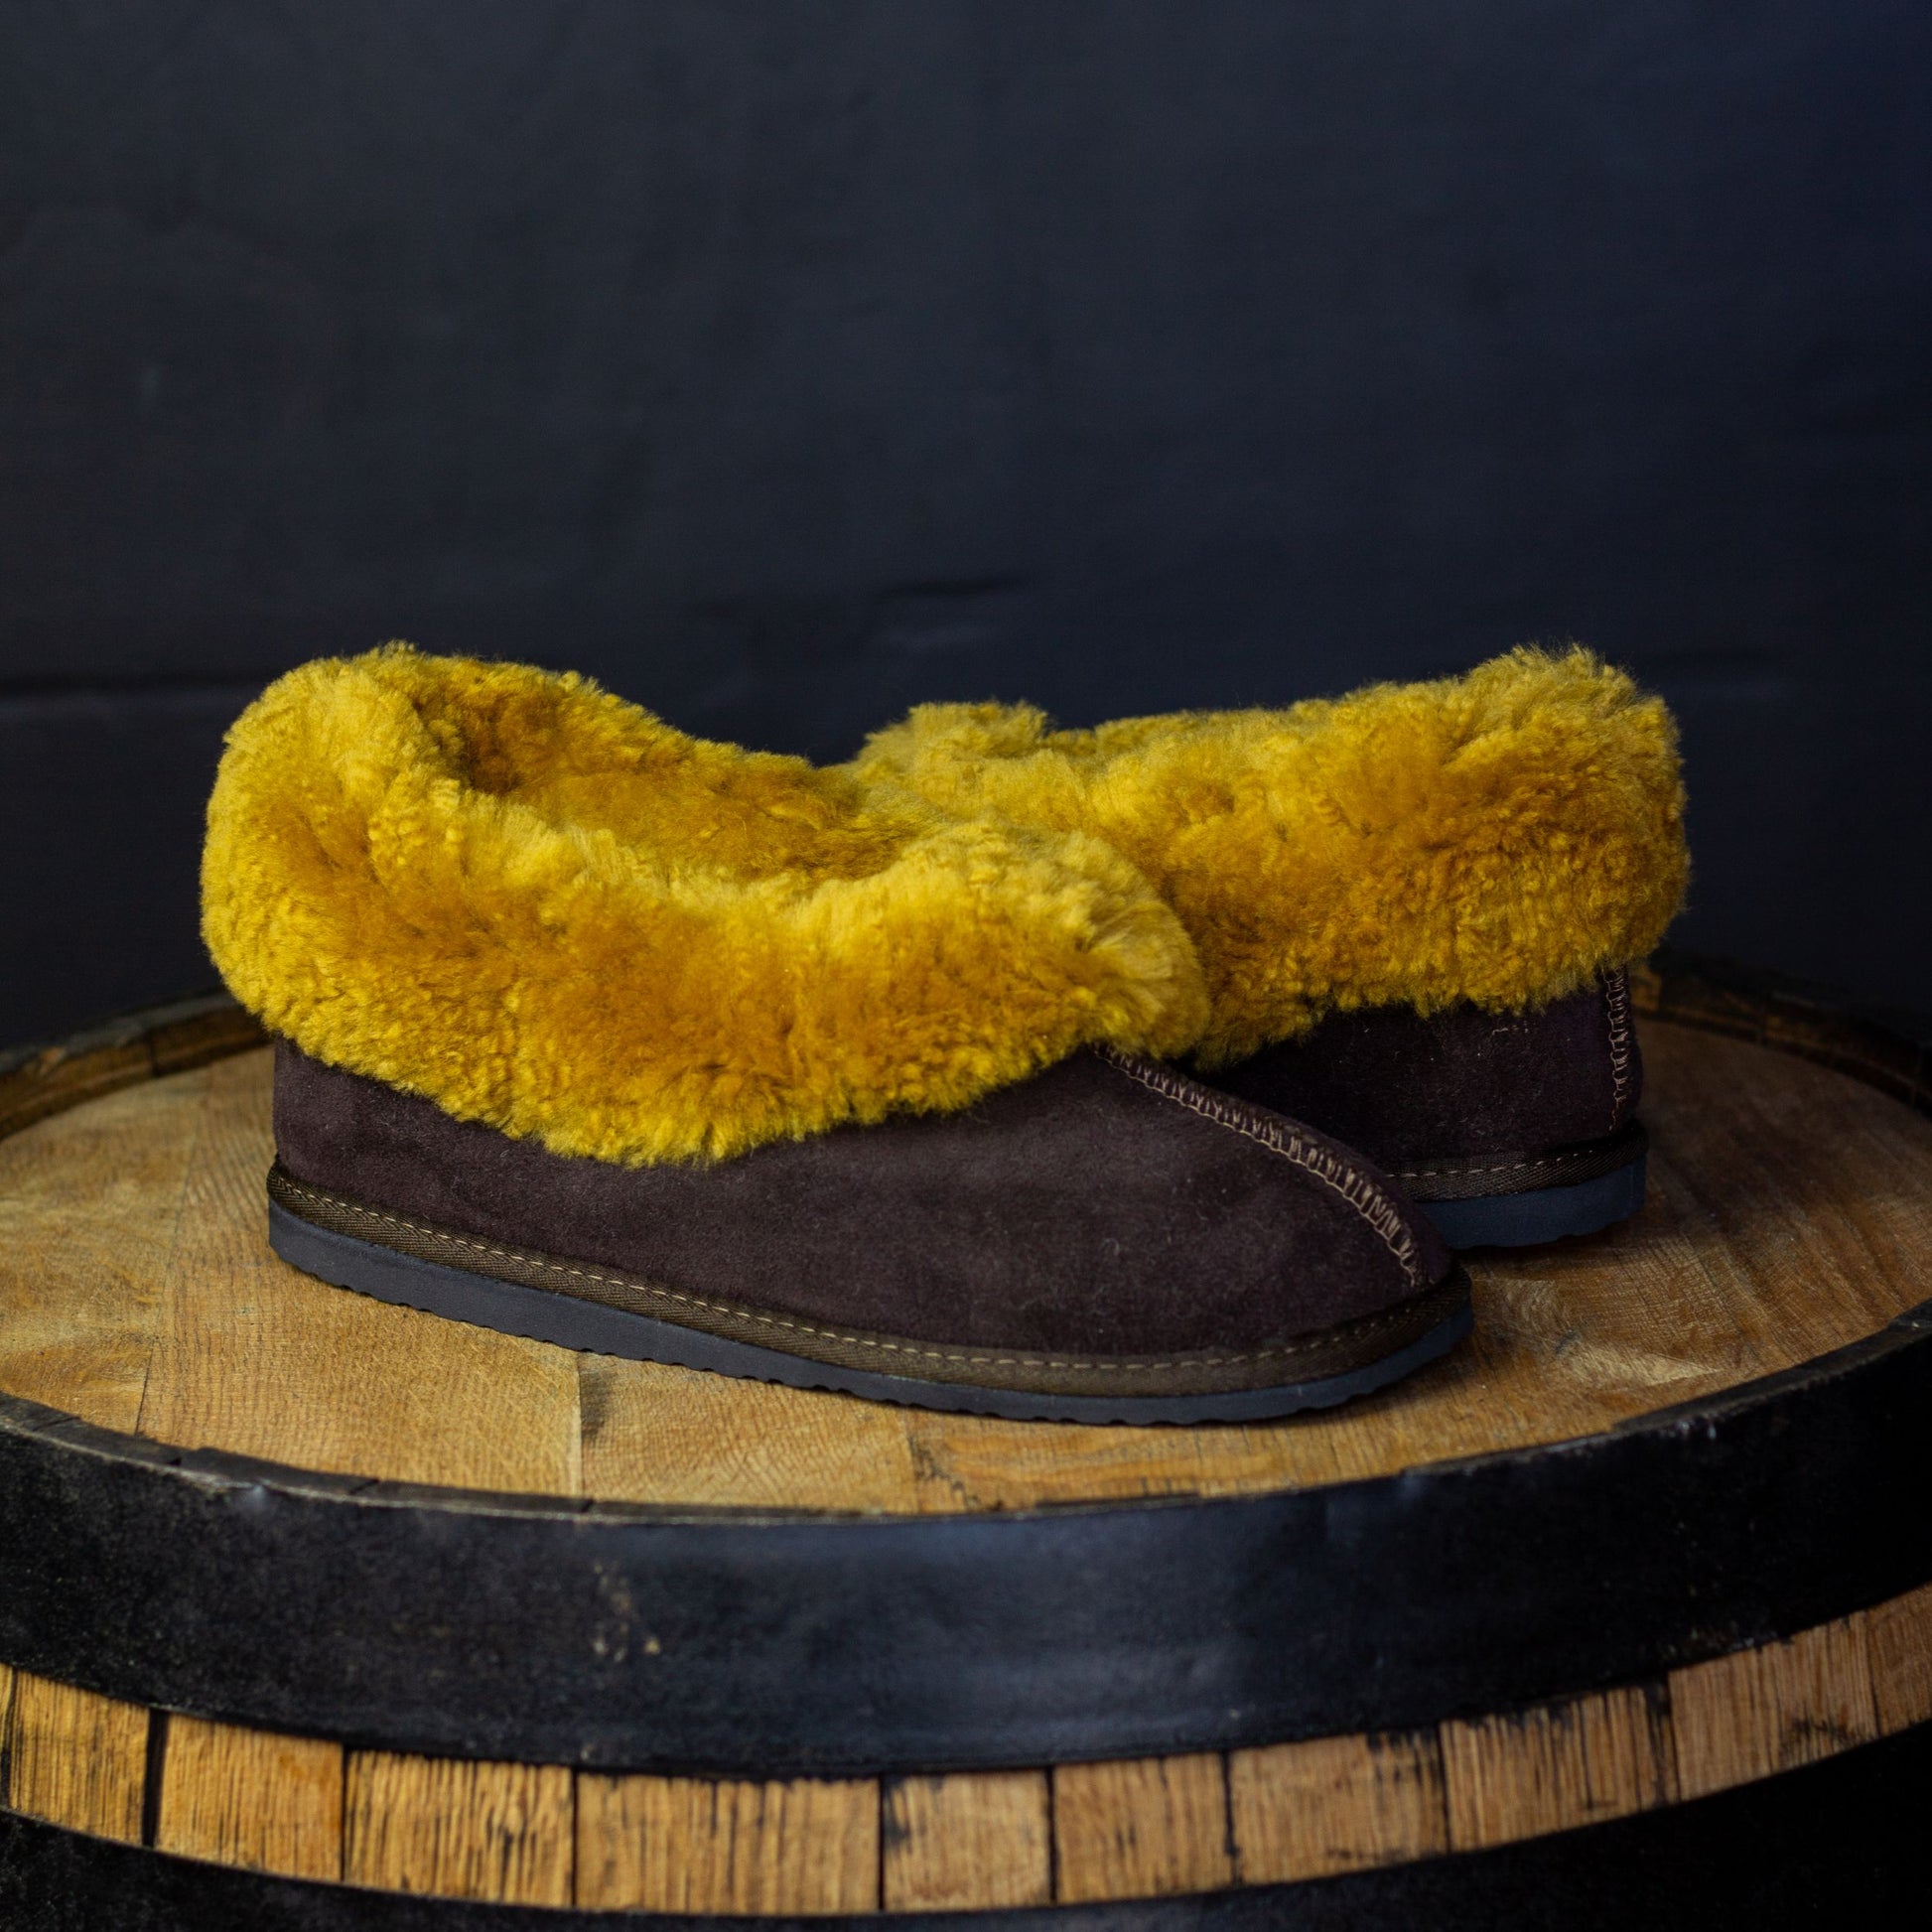 gold and brown sheepskin slippers with rubber sole